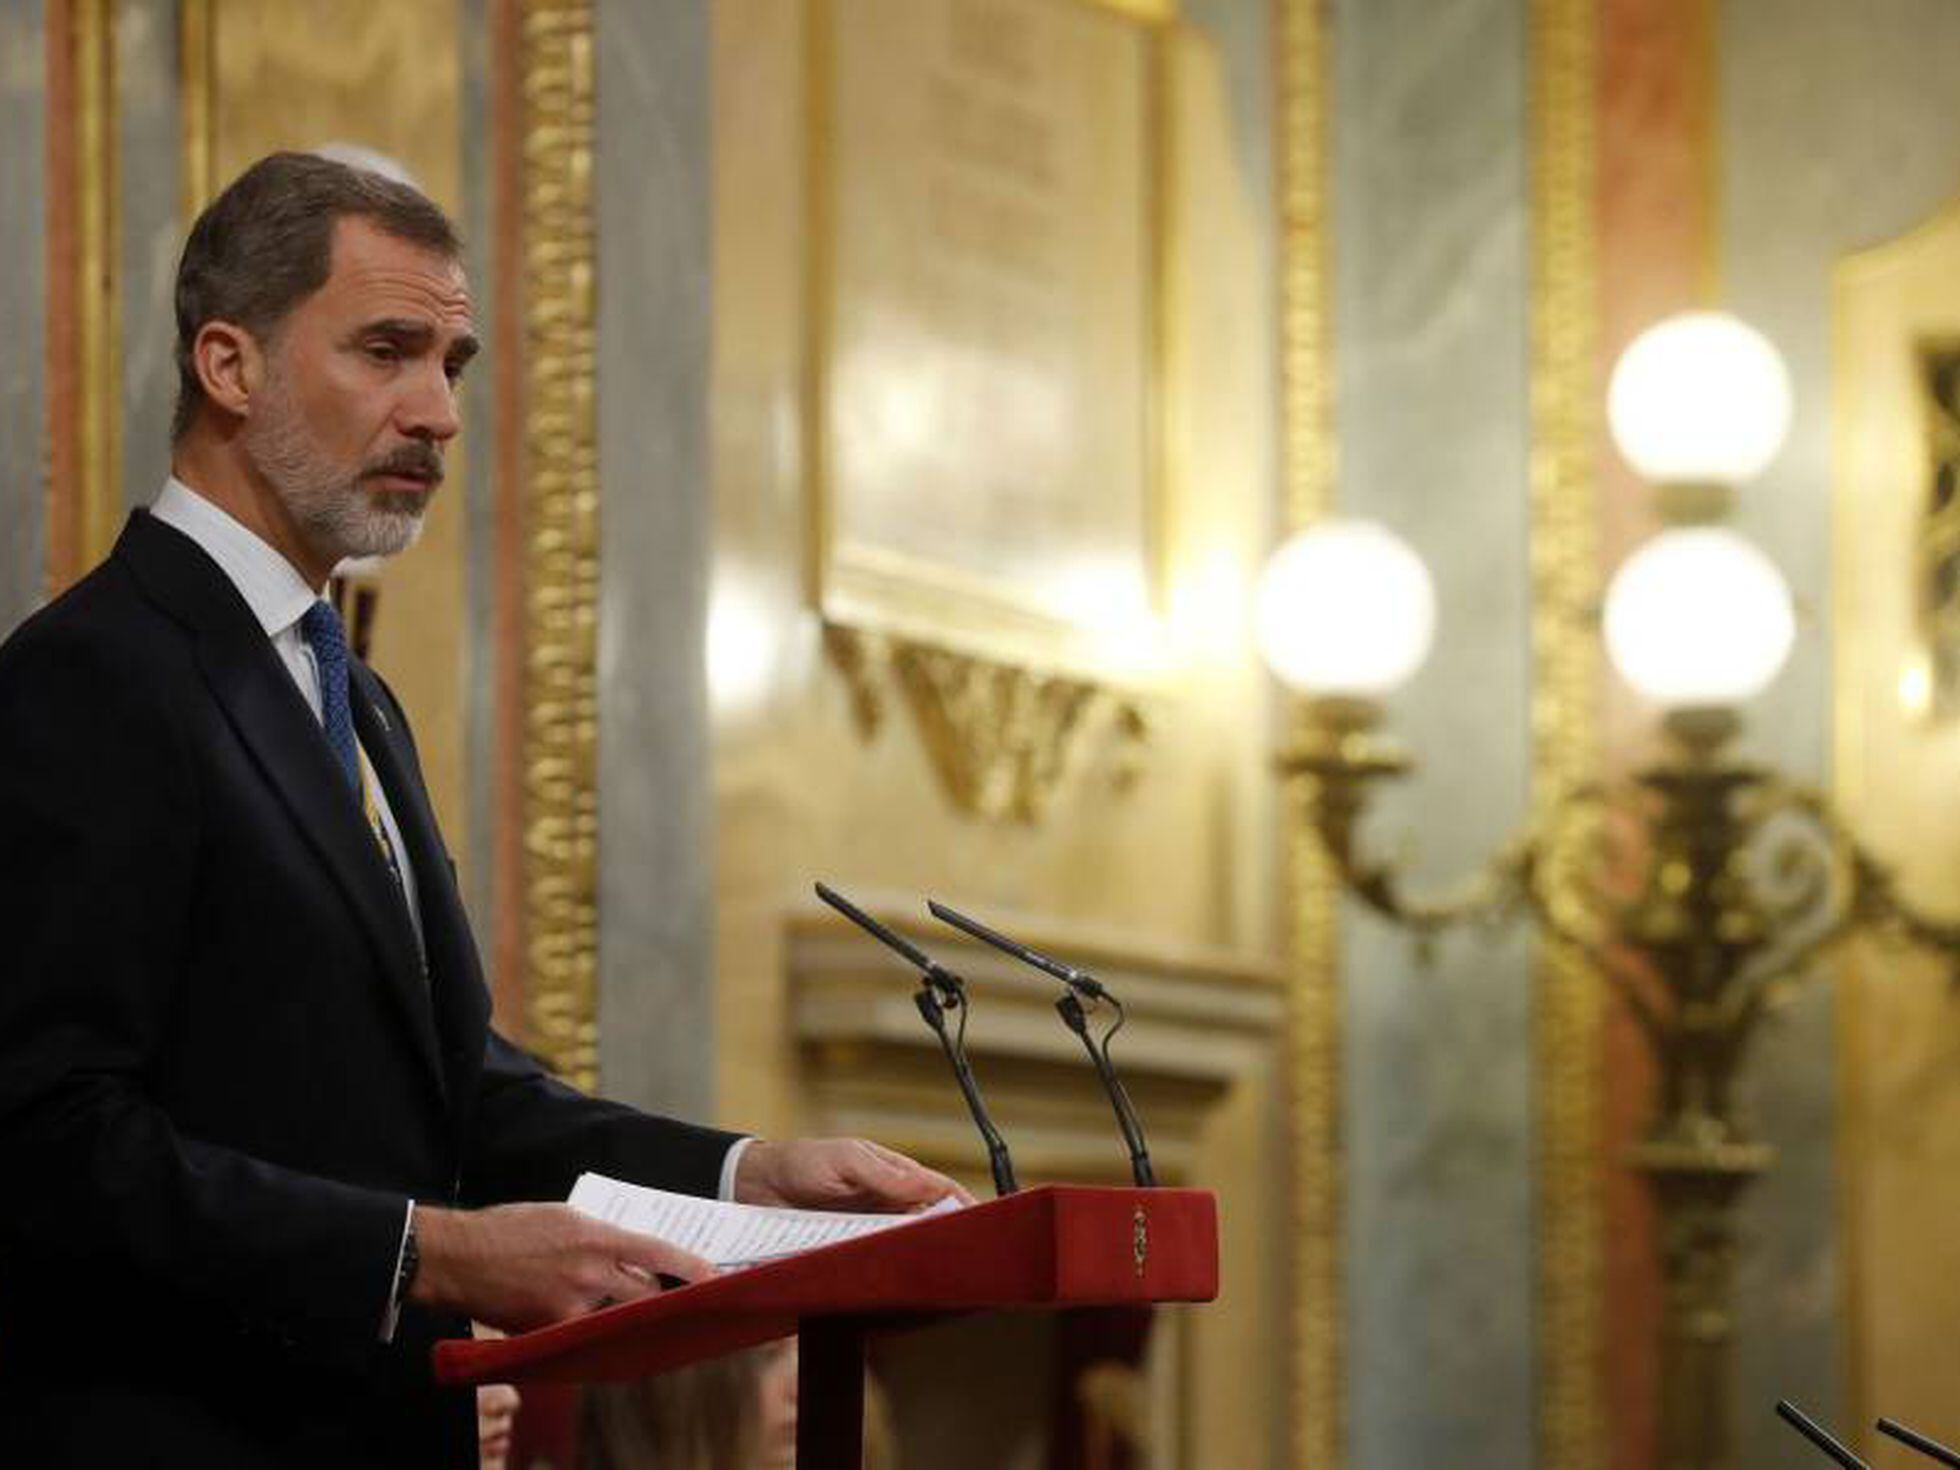 King Felipe VI of Spain at the Congress during the Kings first speech